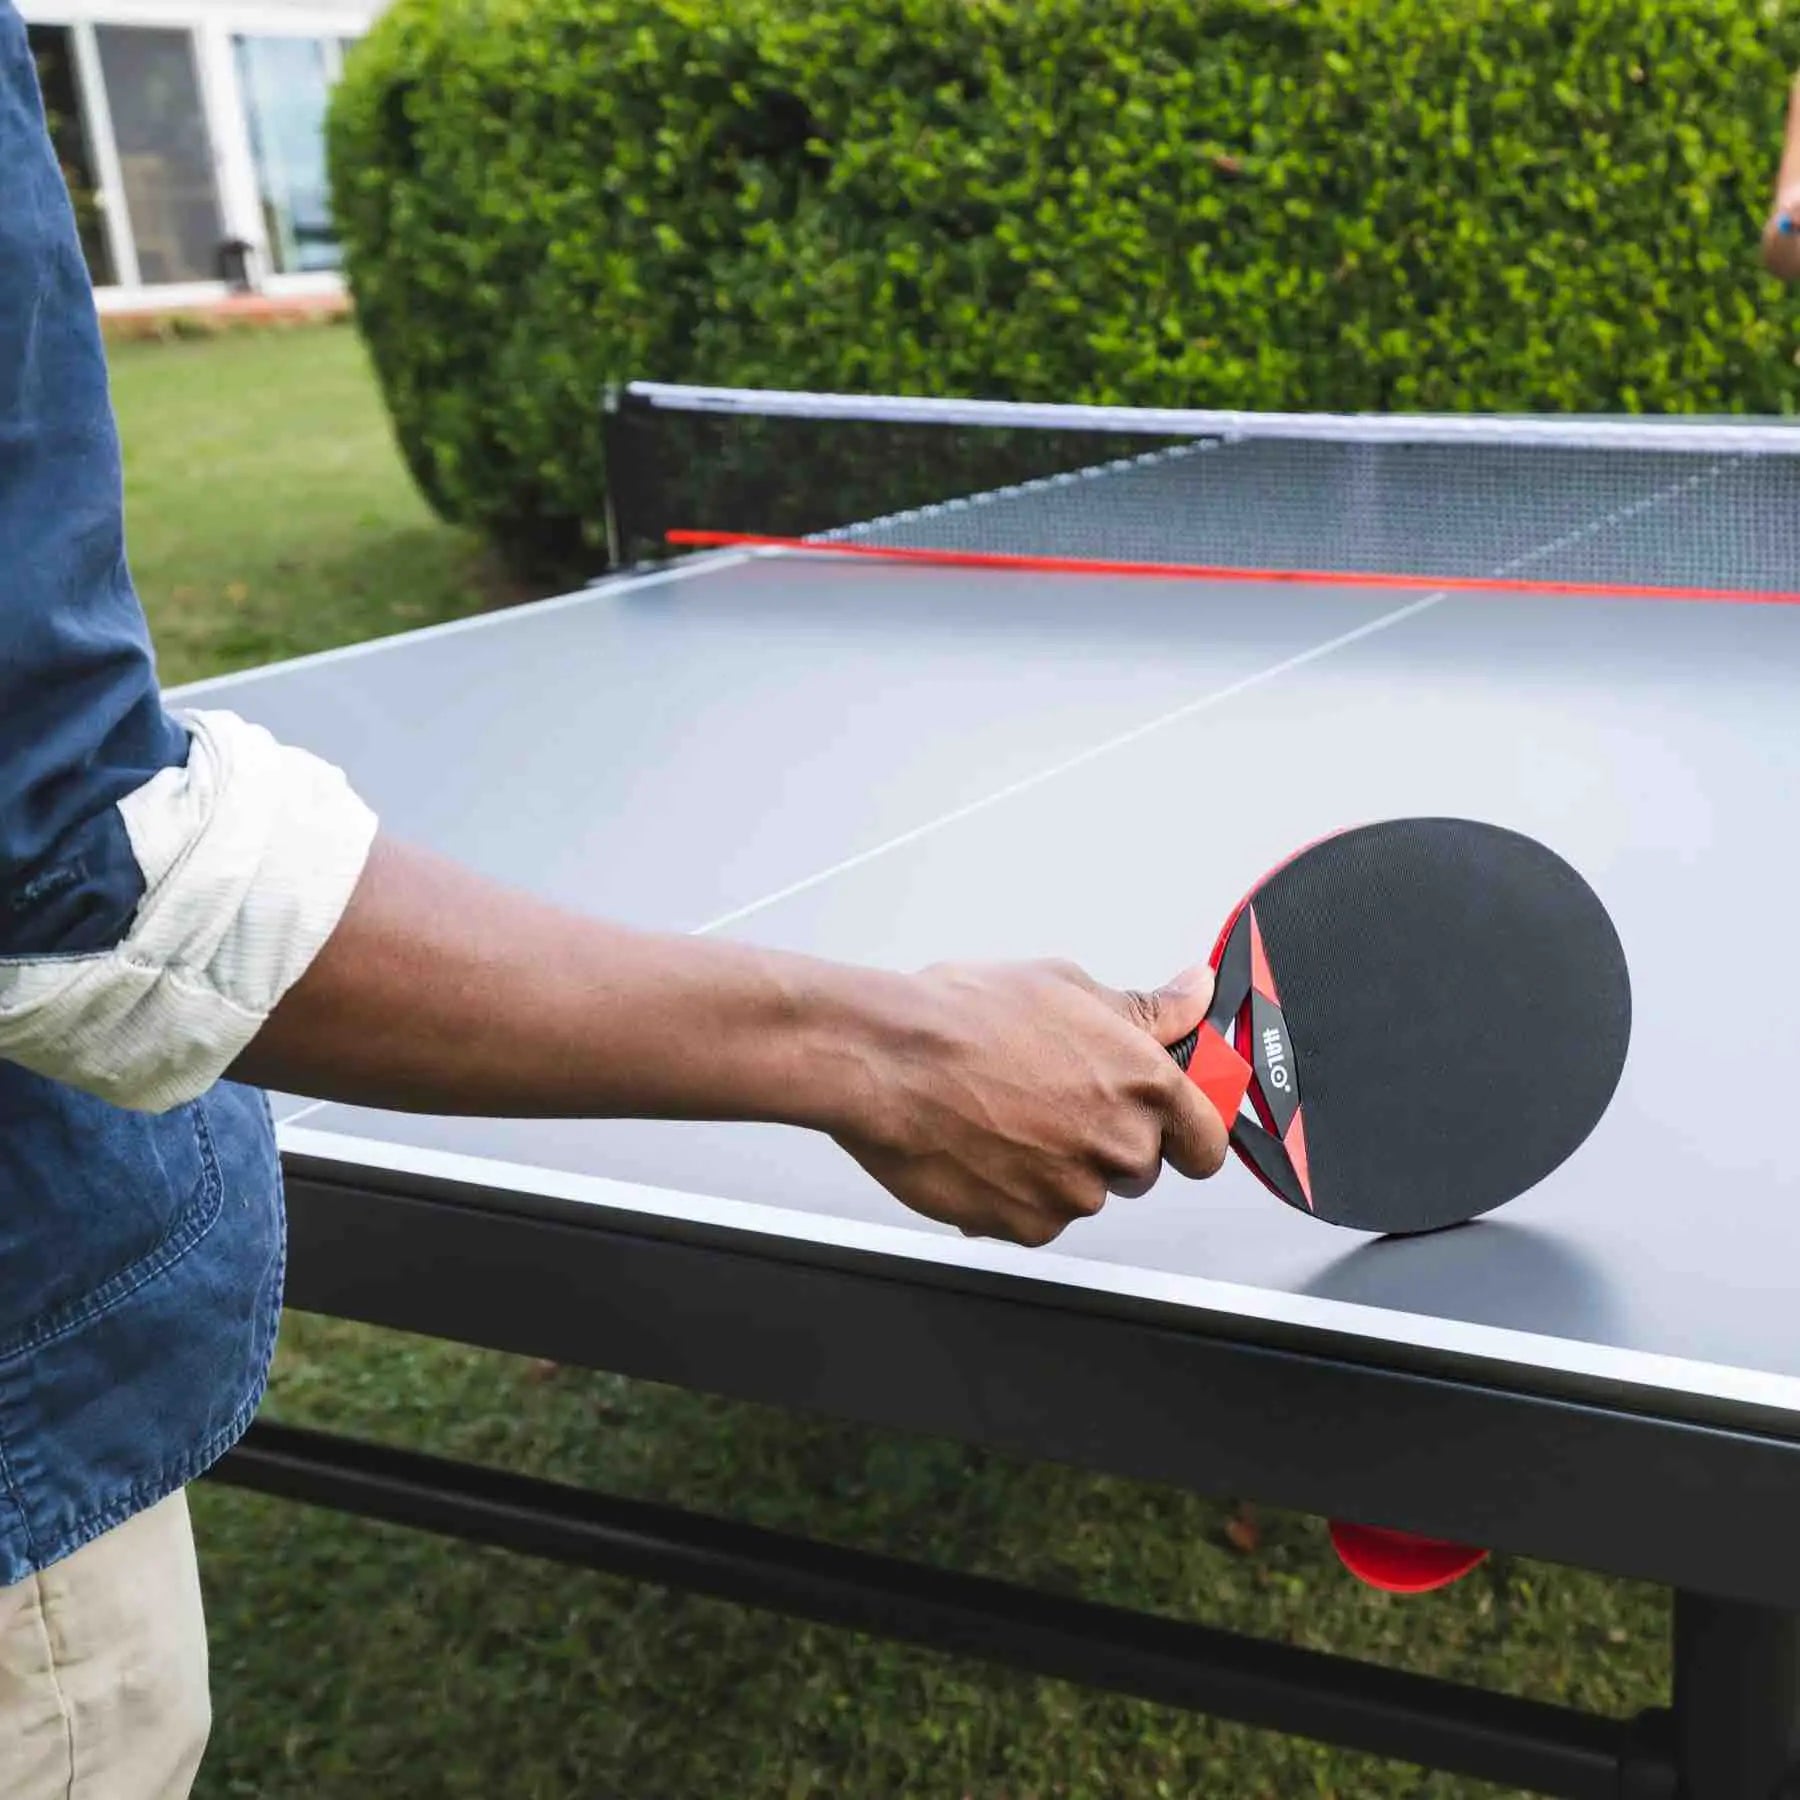 Kettler USA HALO X Outdoor 2 Player Ping Pong Table Tennis Paddle Set, 7092-200